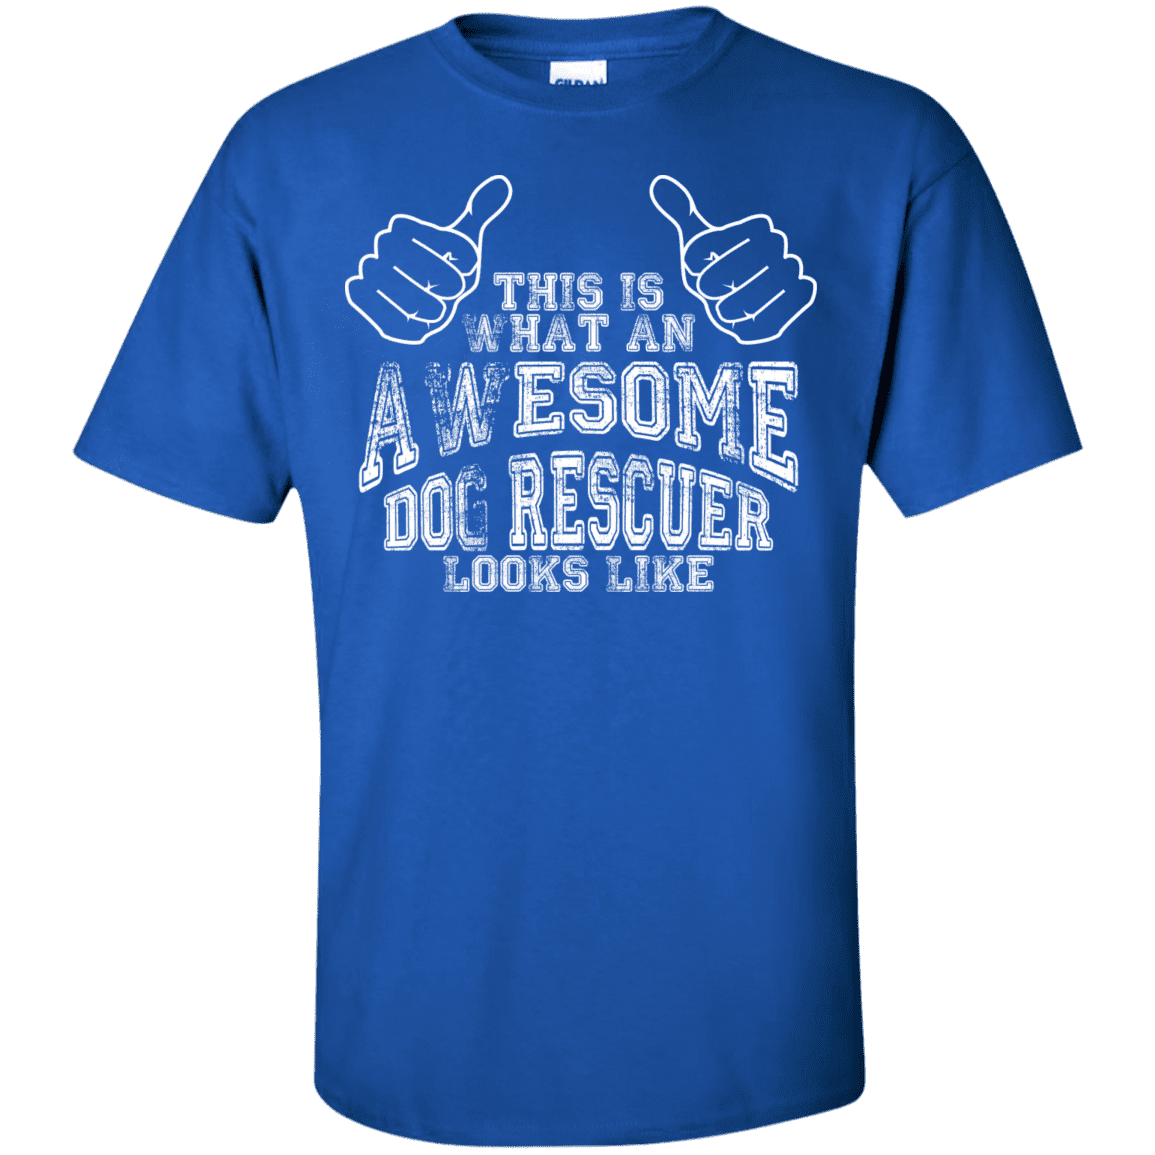 Awesome Dog Rescuer - T Shirt.